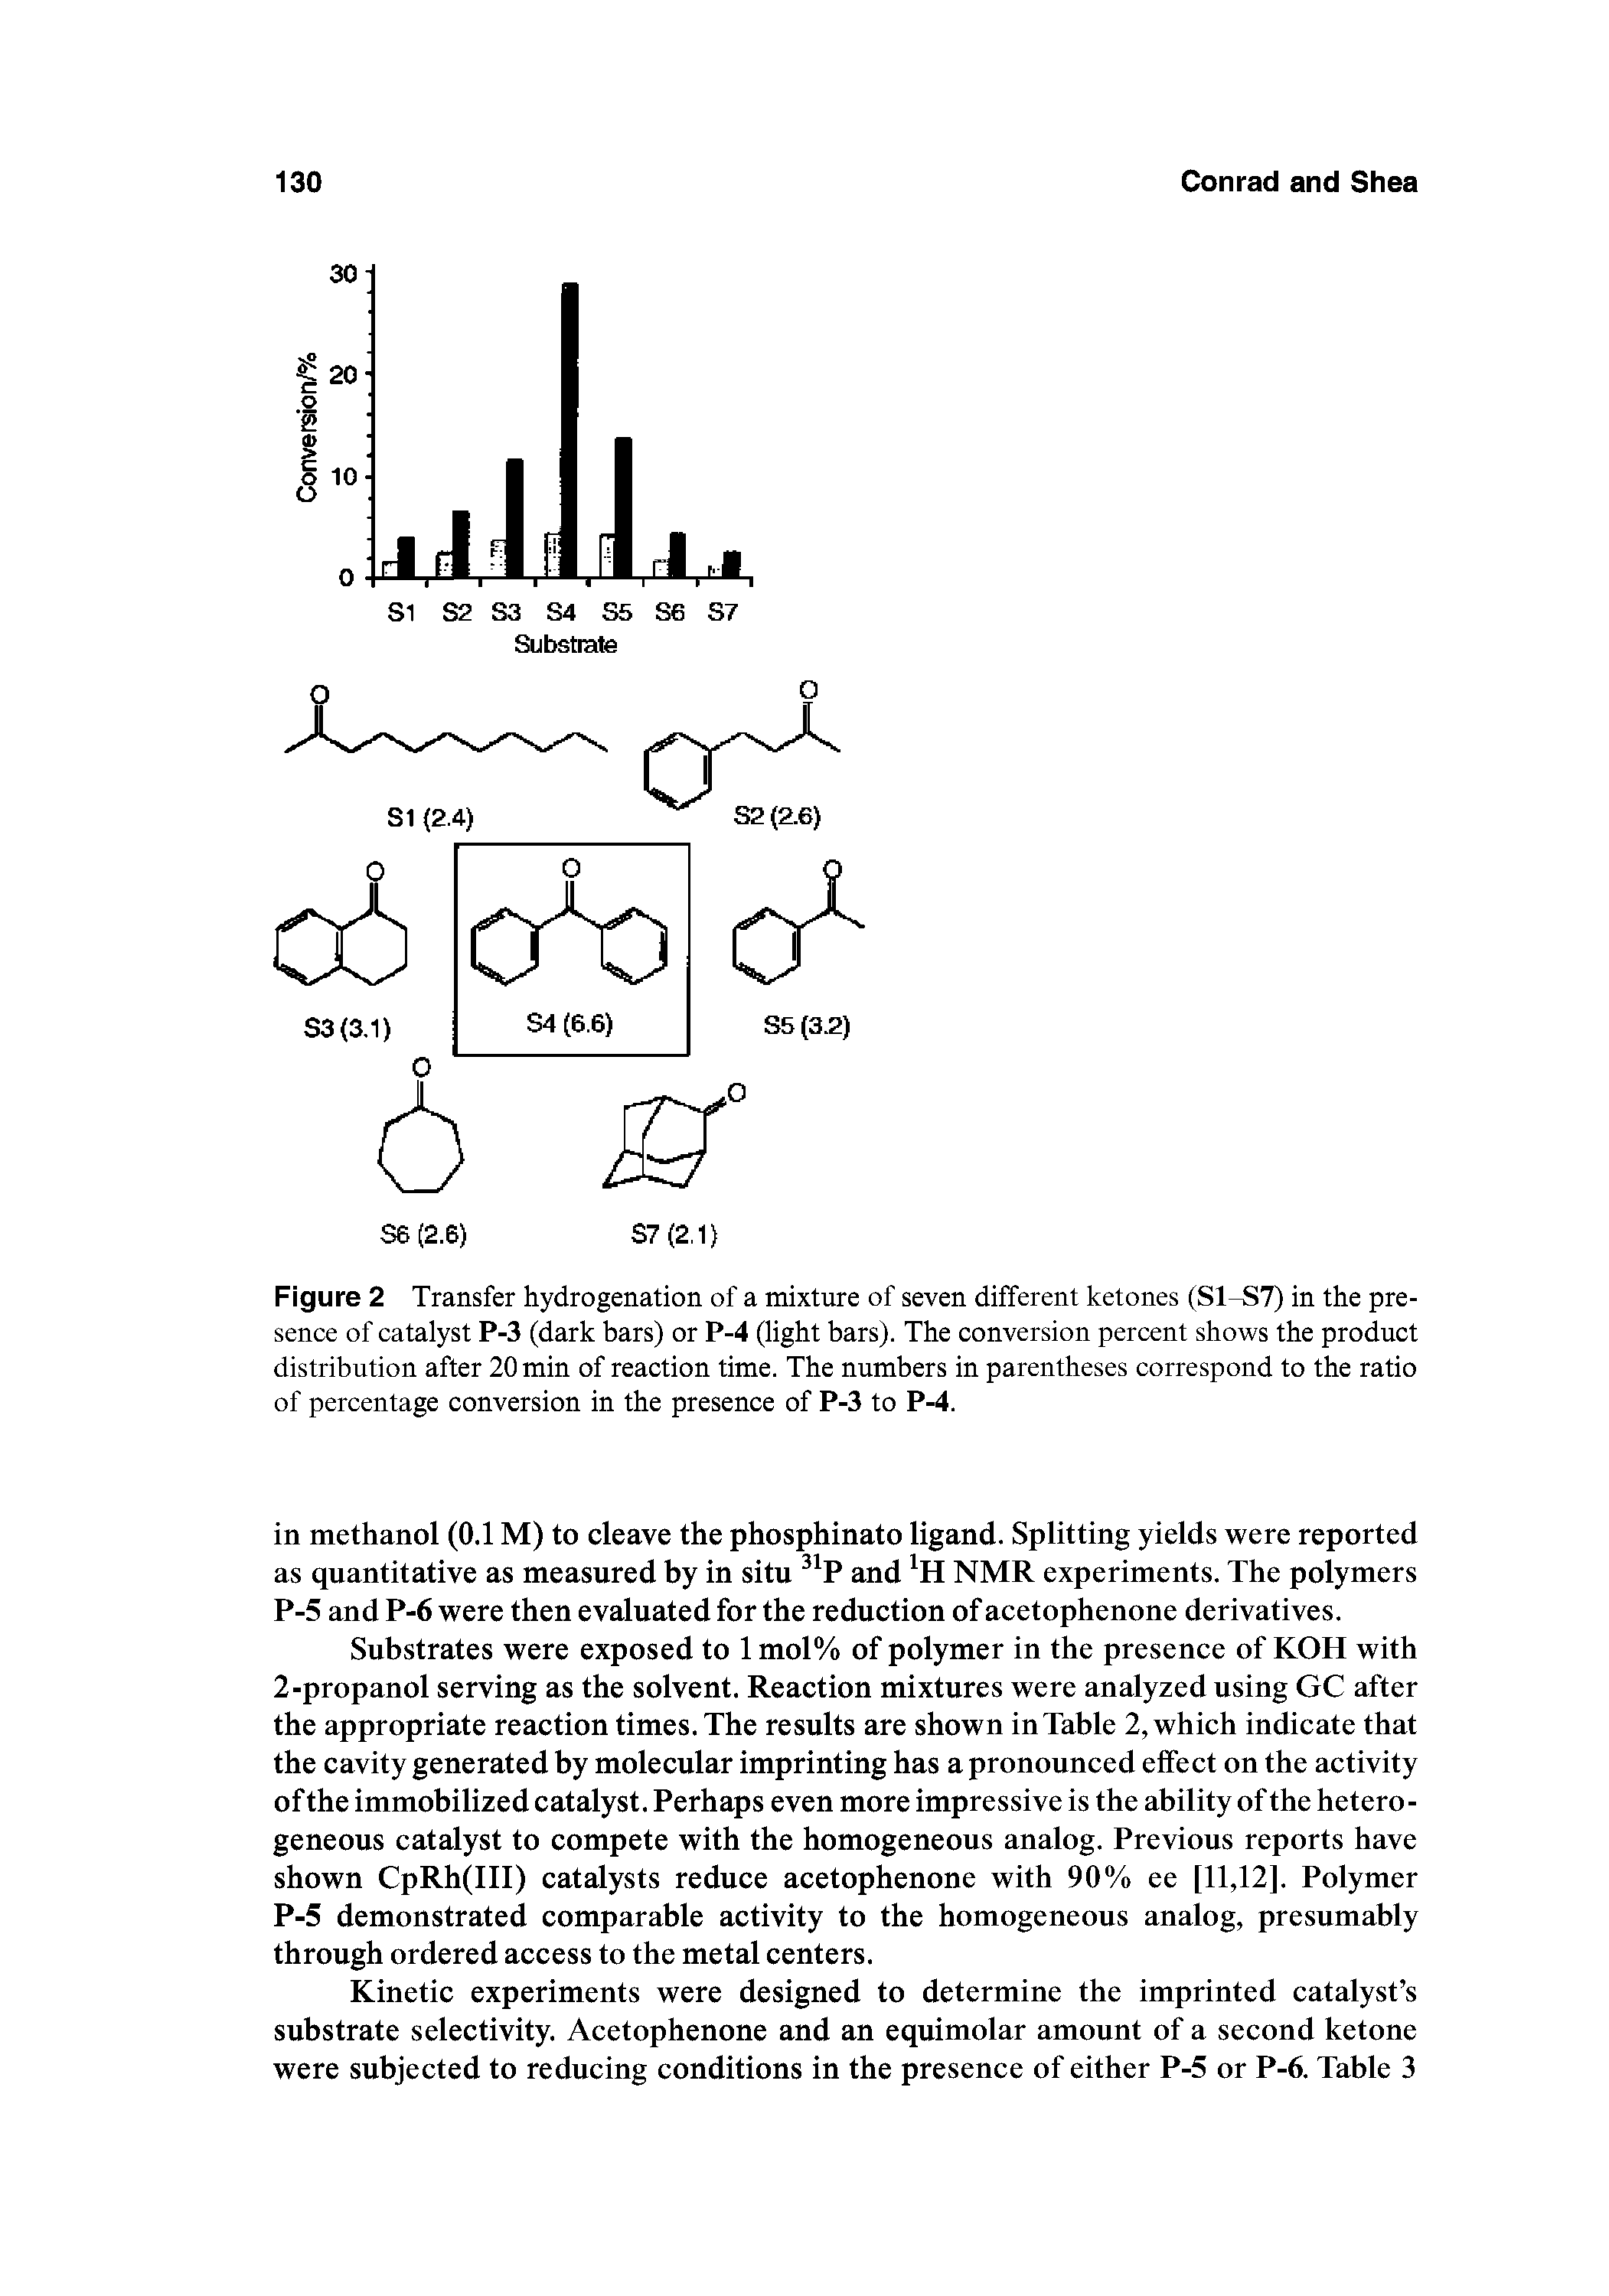 Figure 2 Transfer hydrogenation of a mixture of seven different ketones (S1-S7) in the presence of catalyst P-3 (dark bars) or P-4 (light bars). The conversion percent shows the product distribution after 20 min of reaction time. The numbers in parentheses correspond to the ratio of percentage conversion in the presence of P-3 to P-4.